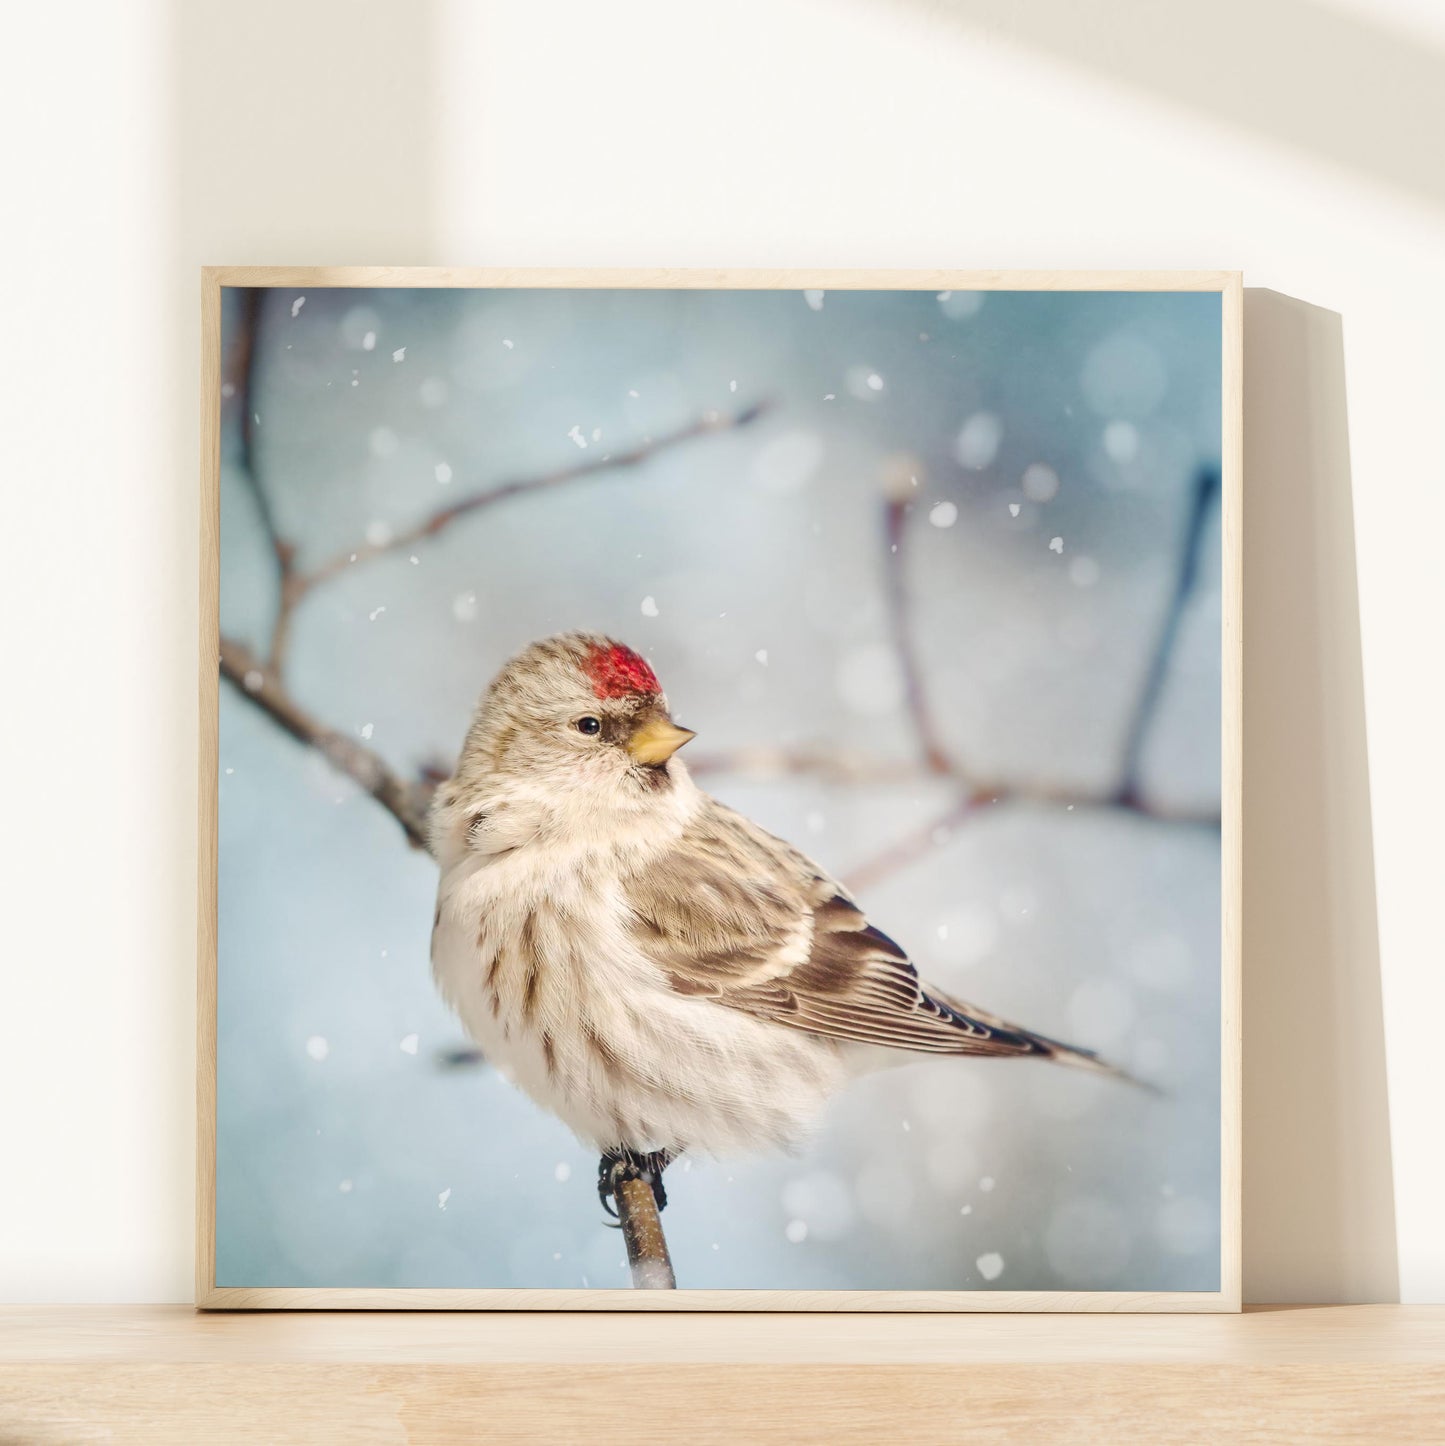 Redpoll in Snow No. 8